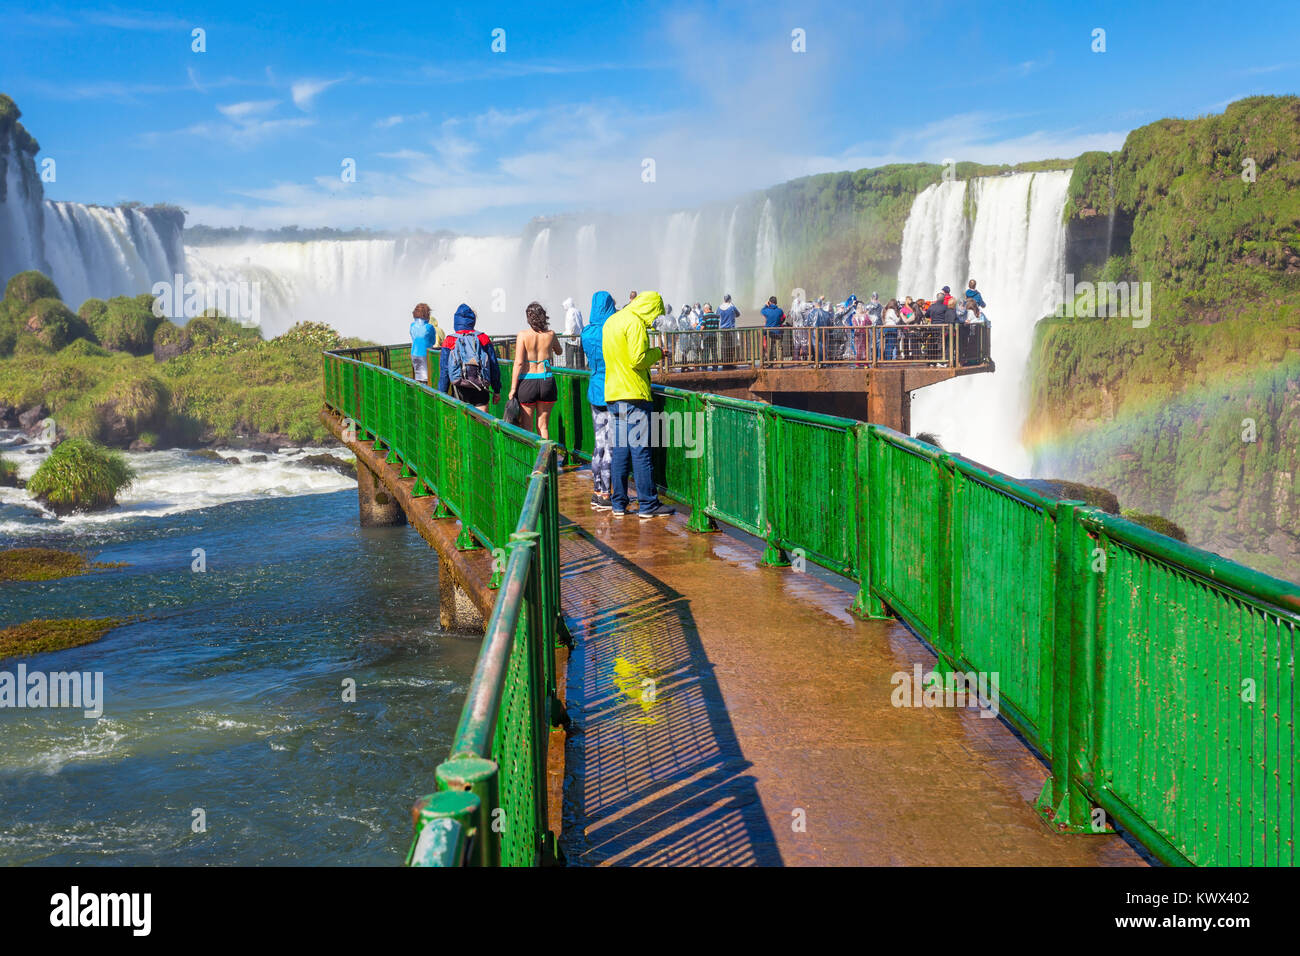 Tourists near the Iguazu Falls, waterfalls of the Iguazu River on the border of the Argentina and the Brazil. It's one of the New 7 Wonders of Nature. Stock Photo